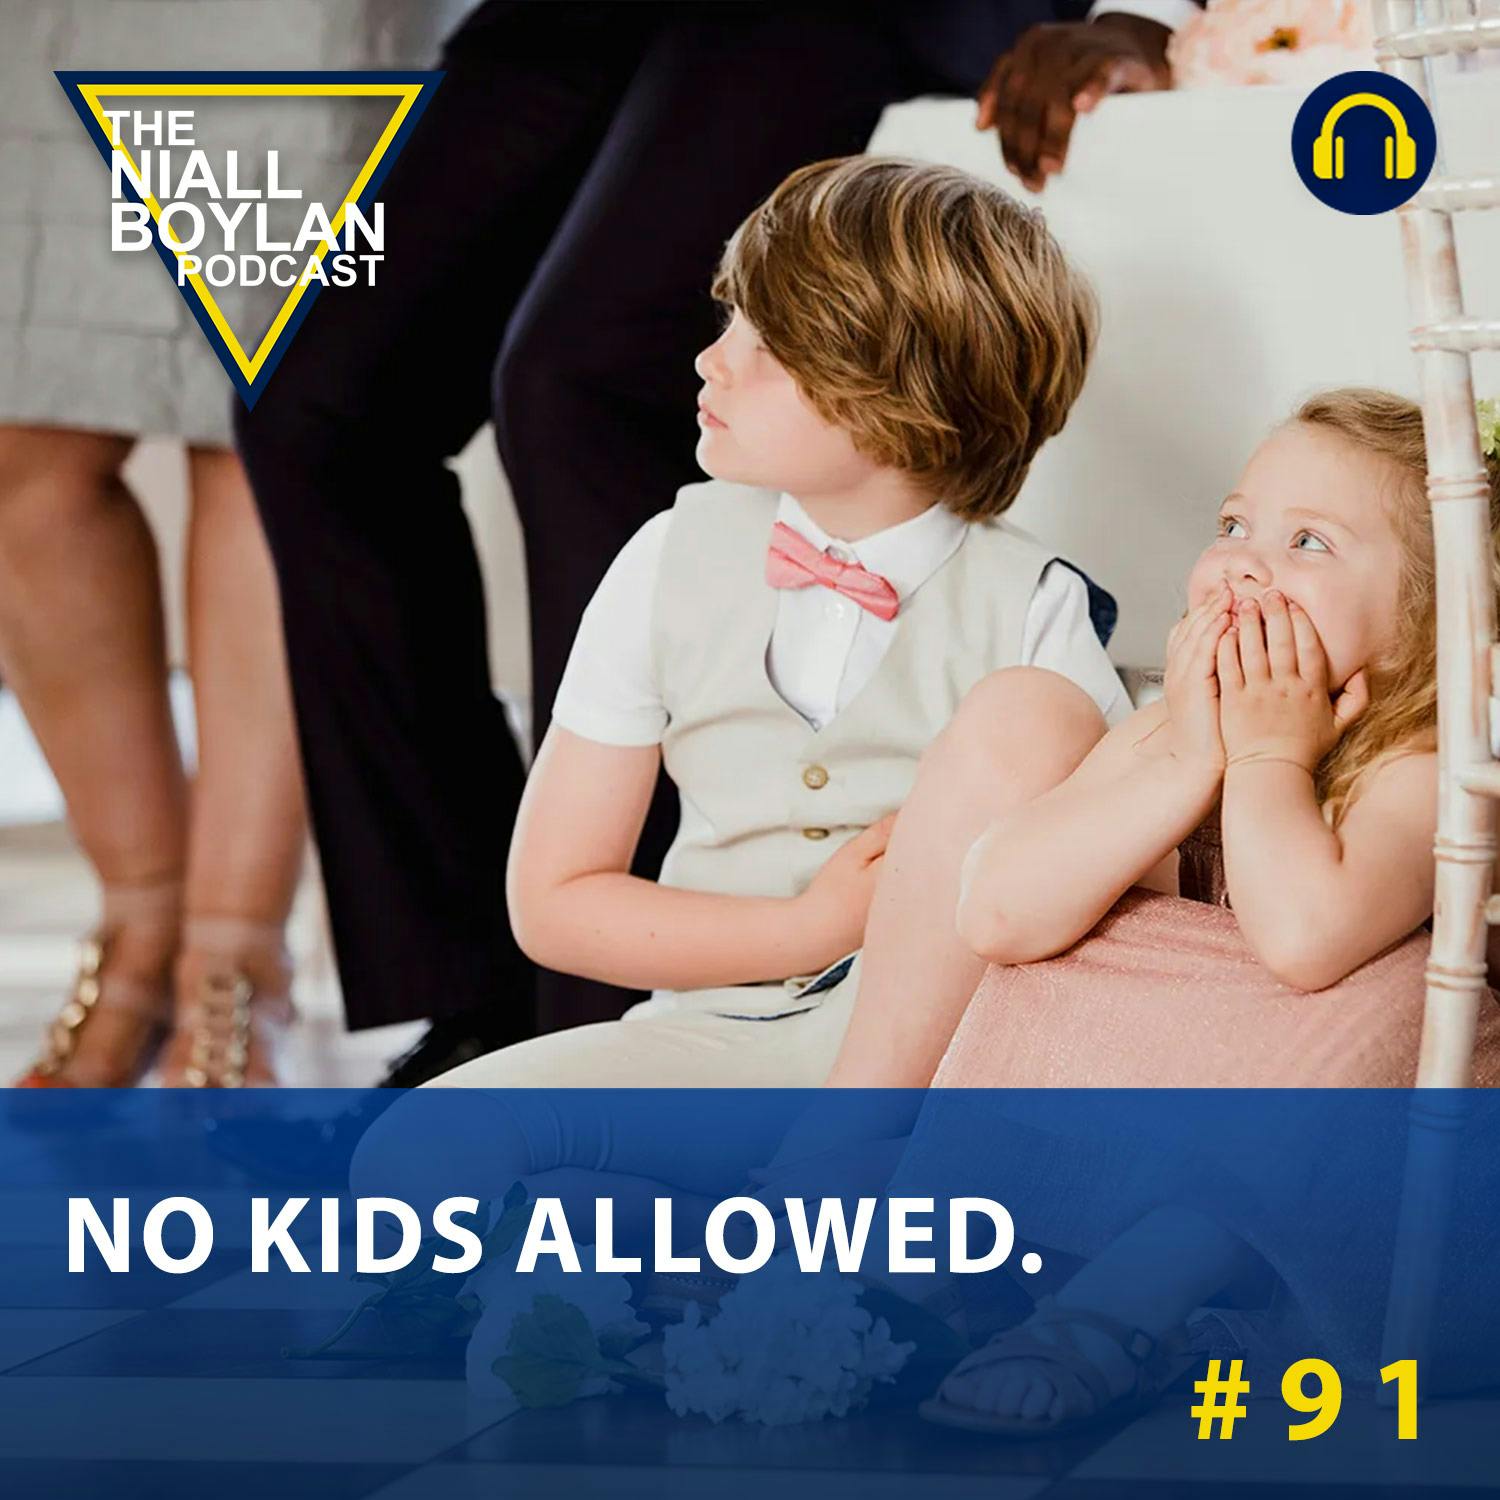 #91 Is A Wedding An Appropriate Place For Children?